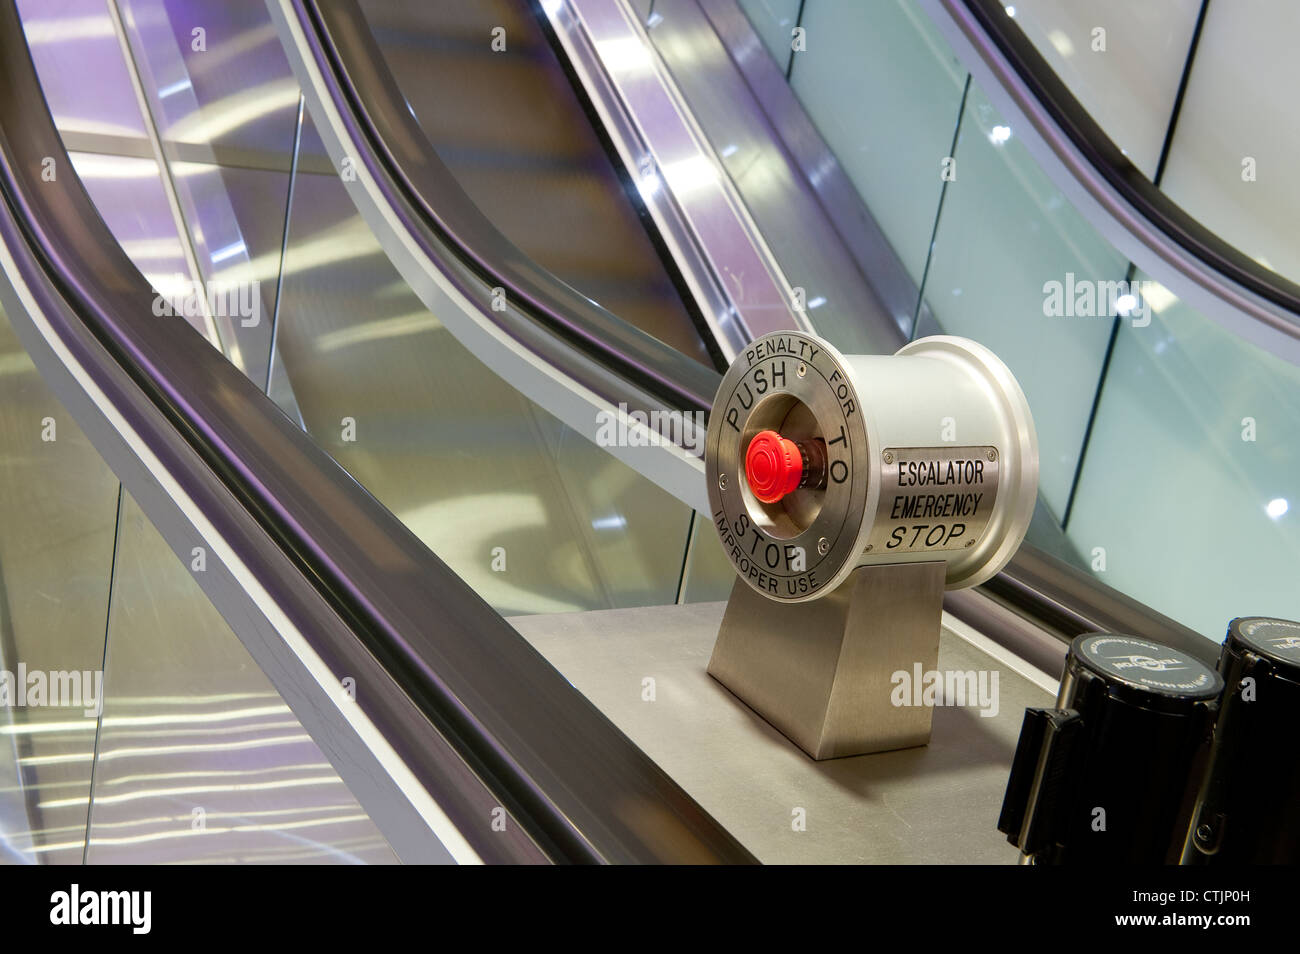 Emergency stop button on escalators in a London railway station, England. Stock Photo